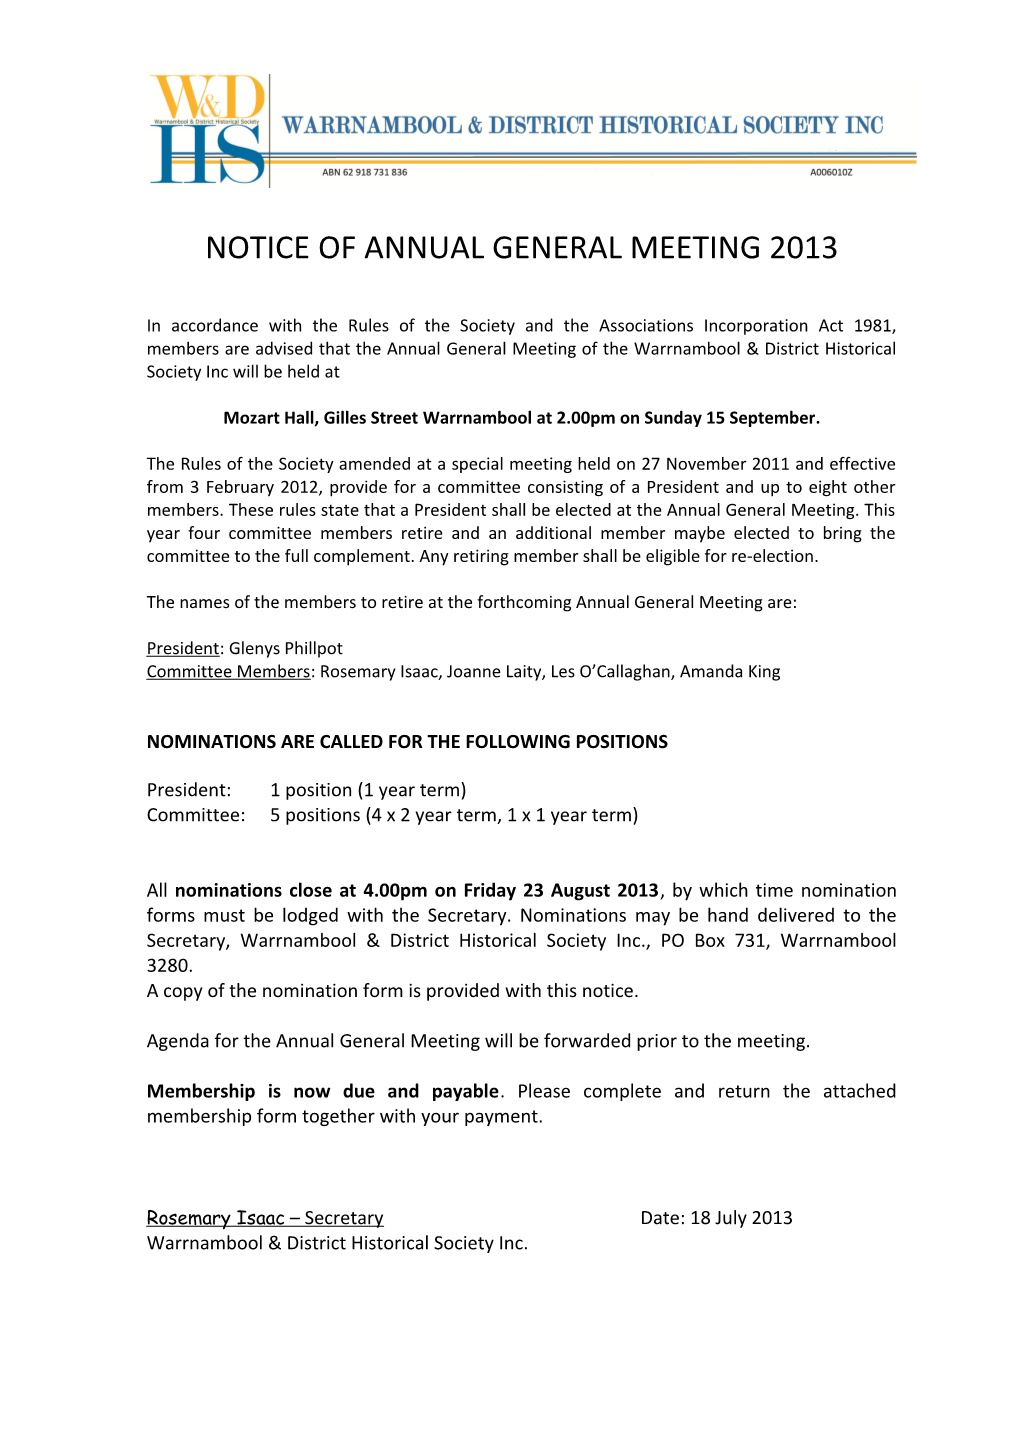 Notice of Annual General Meeting 2010 - 2011 Warrnambool & District Historical Society Inc